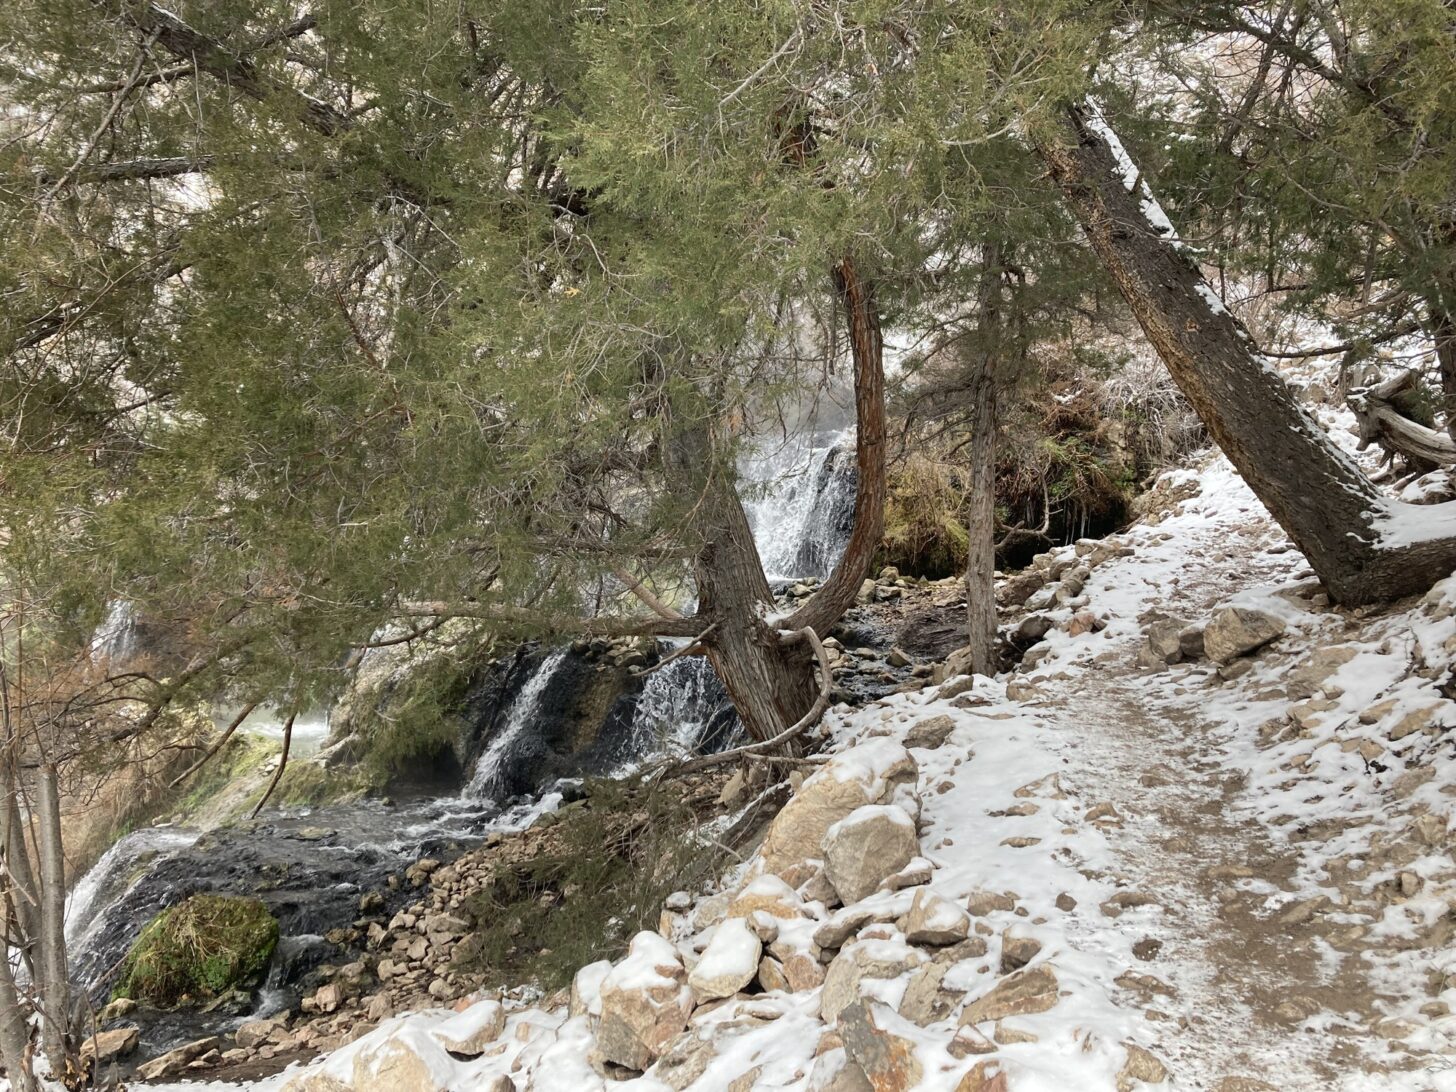 A snowy trail is next to a cascading creek of hot water.